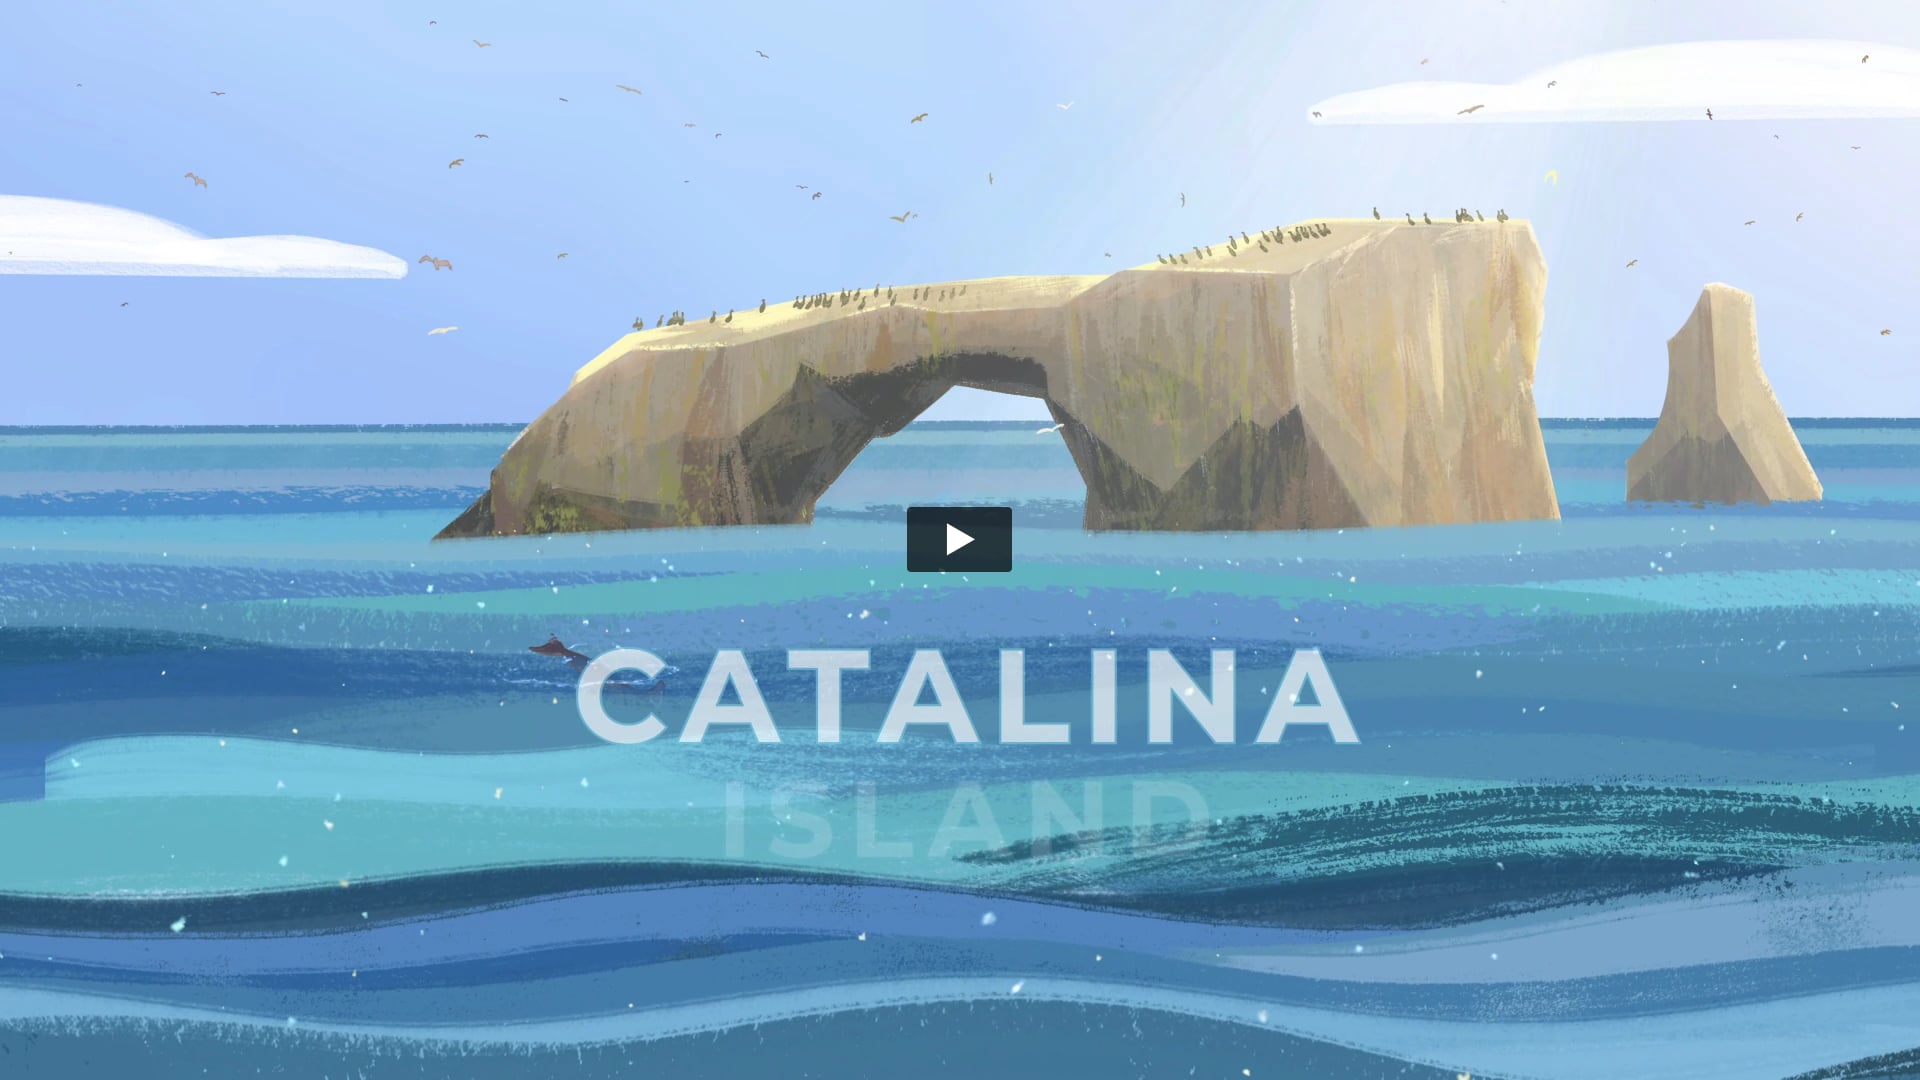 Video about the importance of biosecurity on Catalina Island.